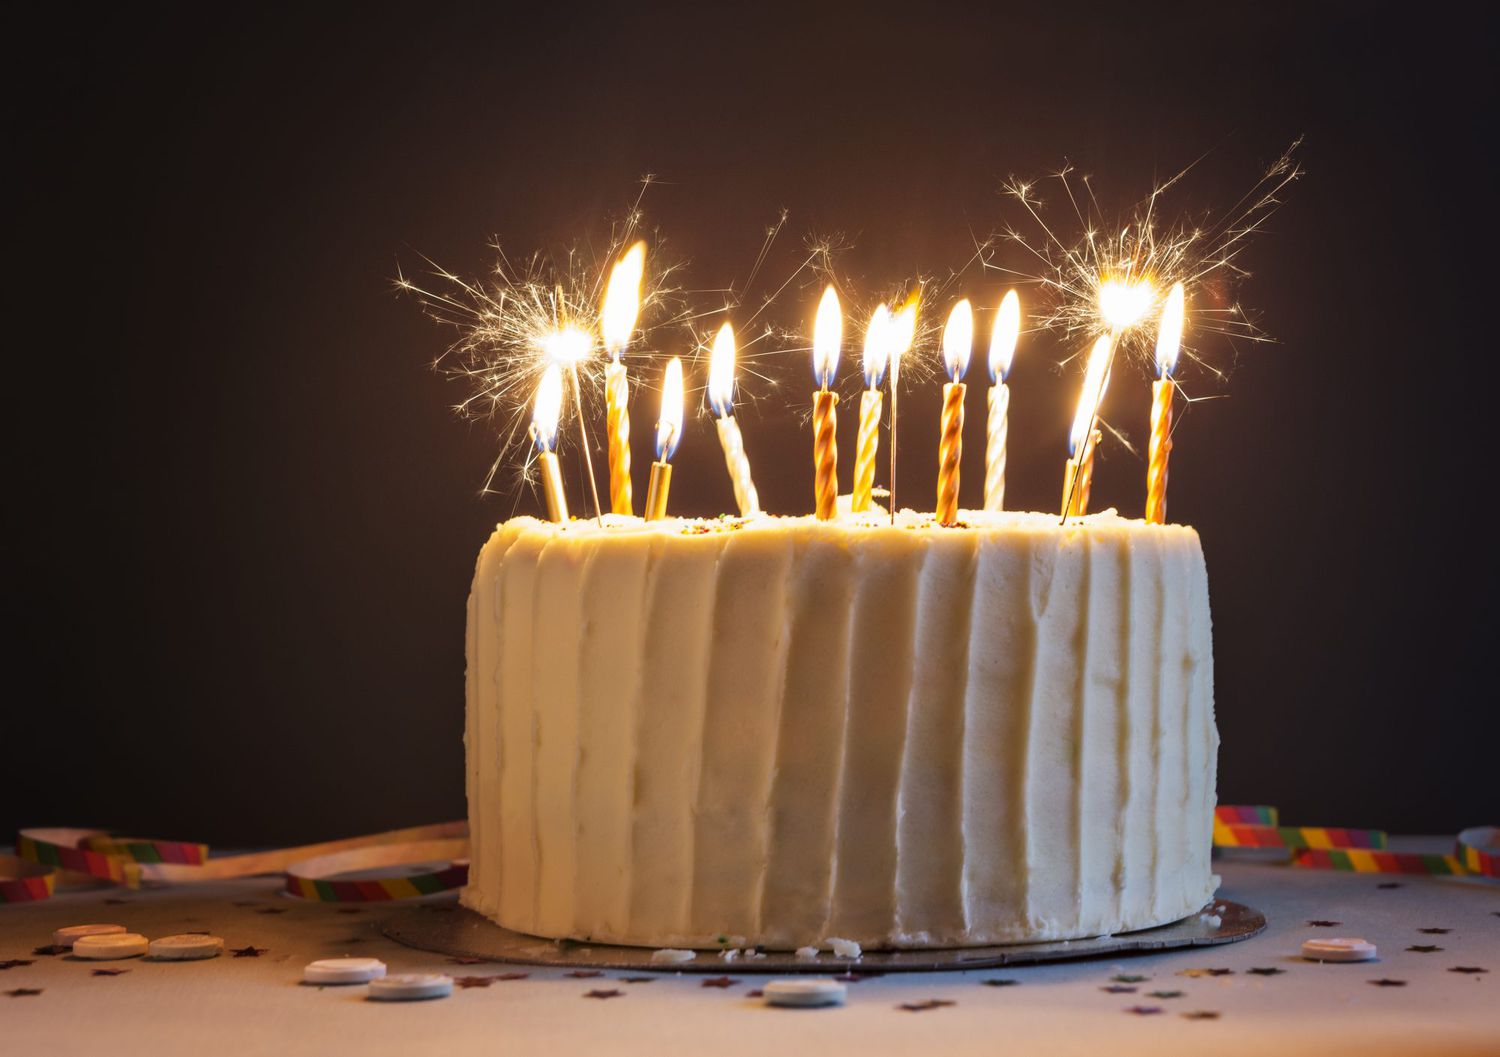 Make a Wish: Unique Ideas for Your Next Birthday Celebration插图